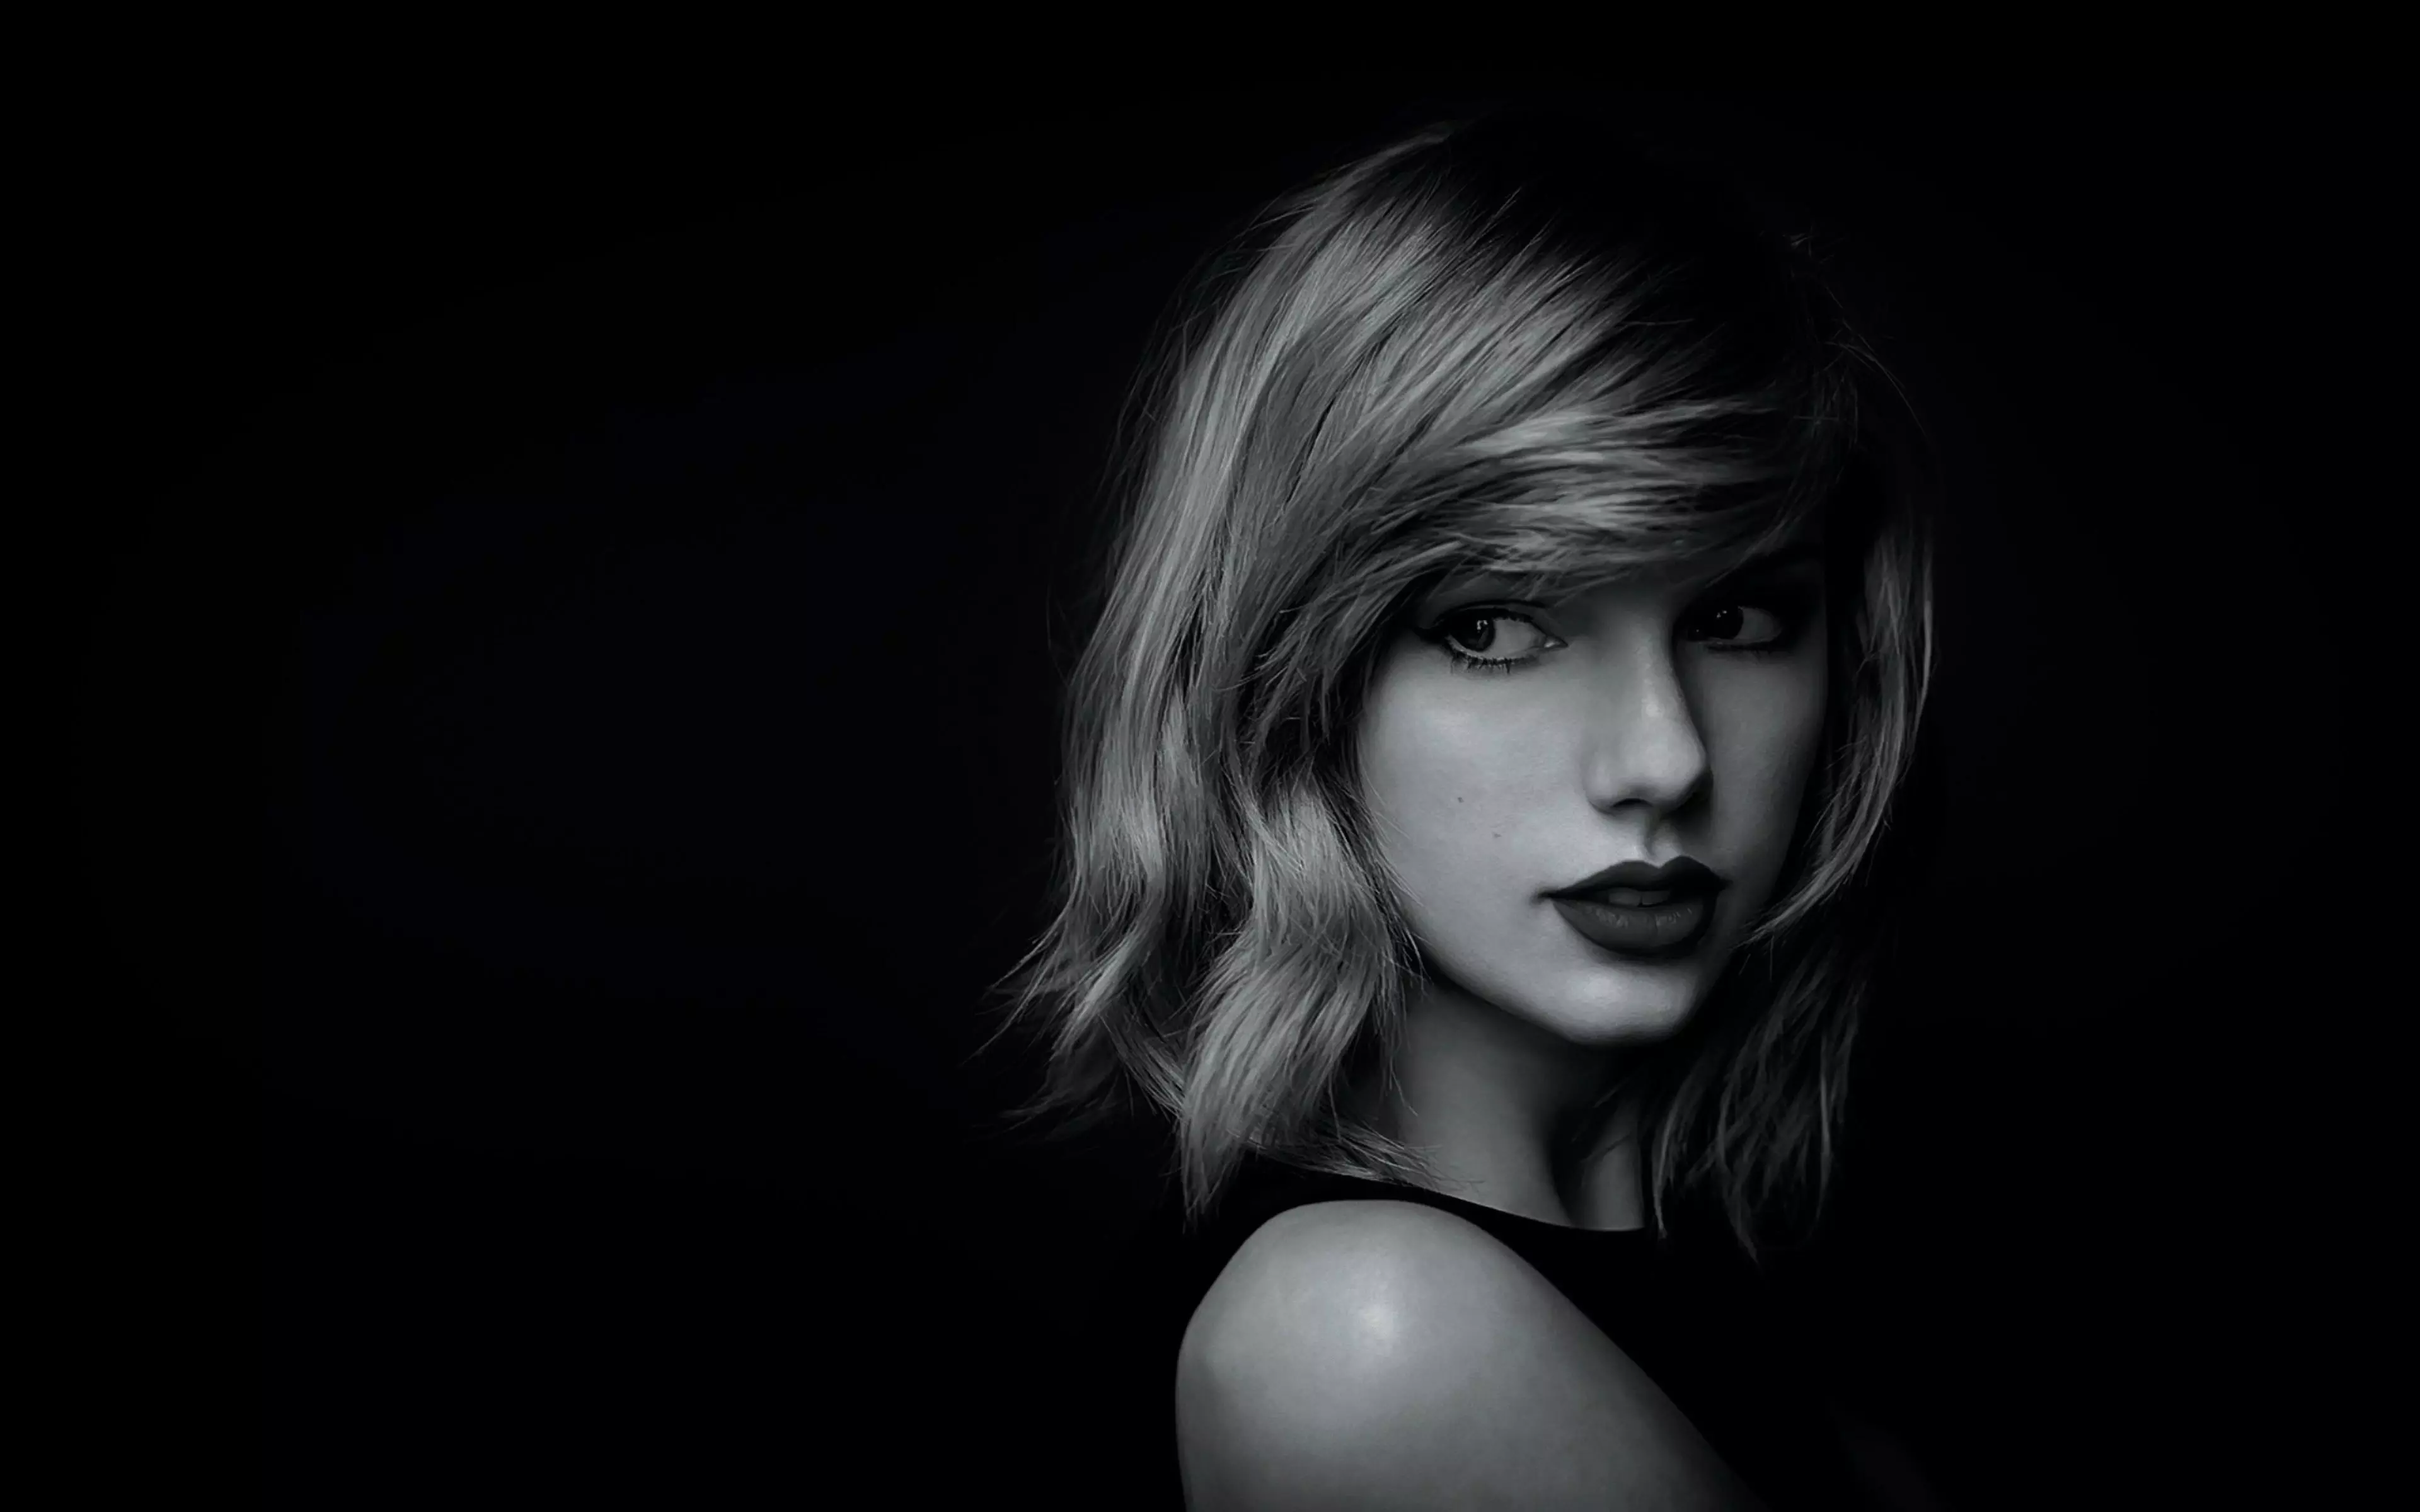 With an original script, Taylor Swift plans on directorial debut